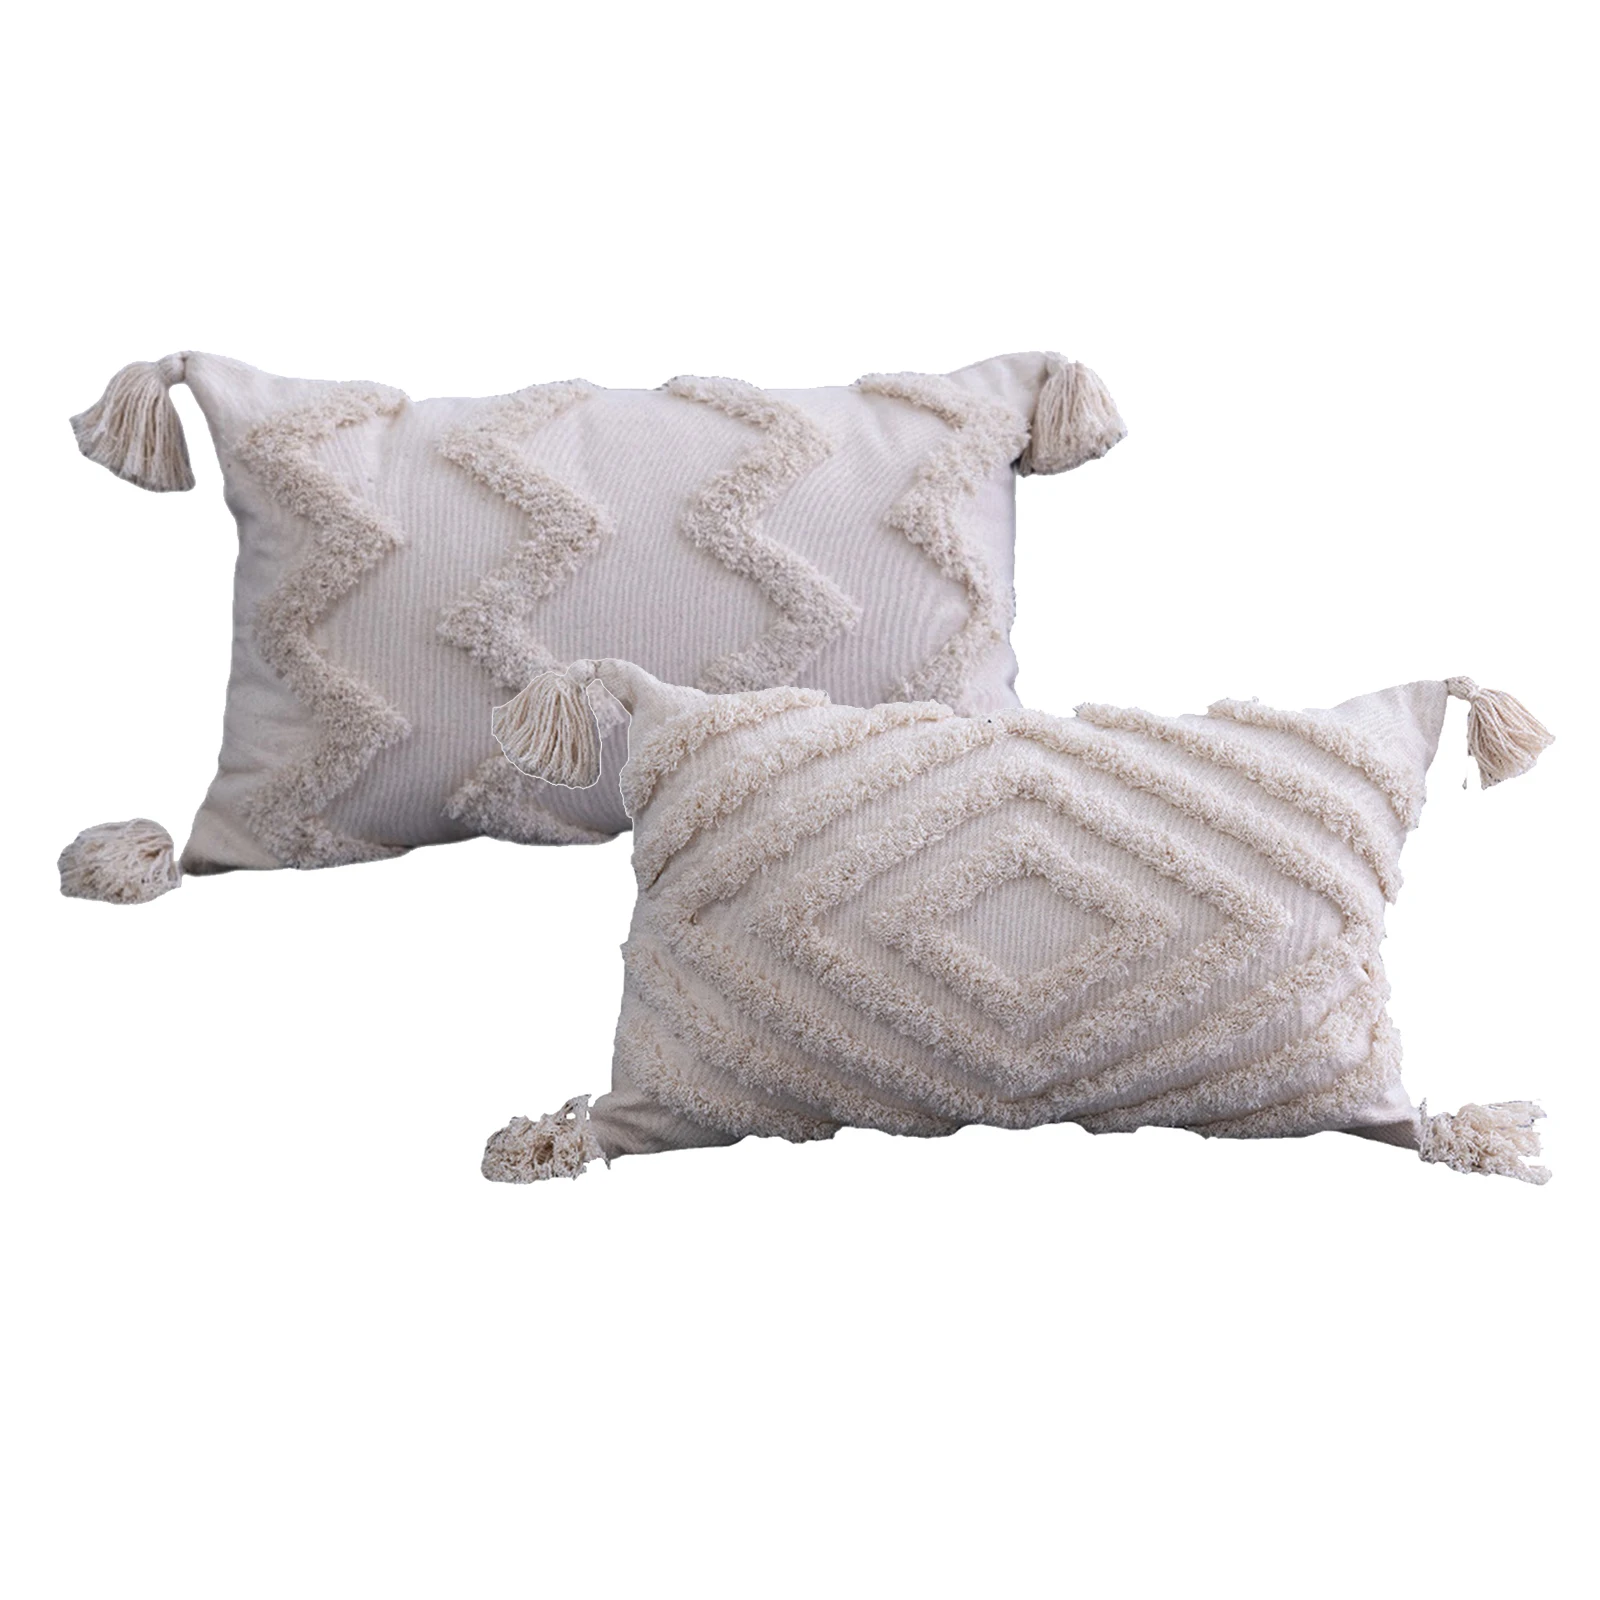 2x Throw  Covers Sqaure Fringe Woven Tufted Pillowcases for Sofa for